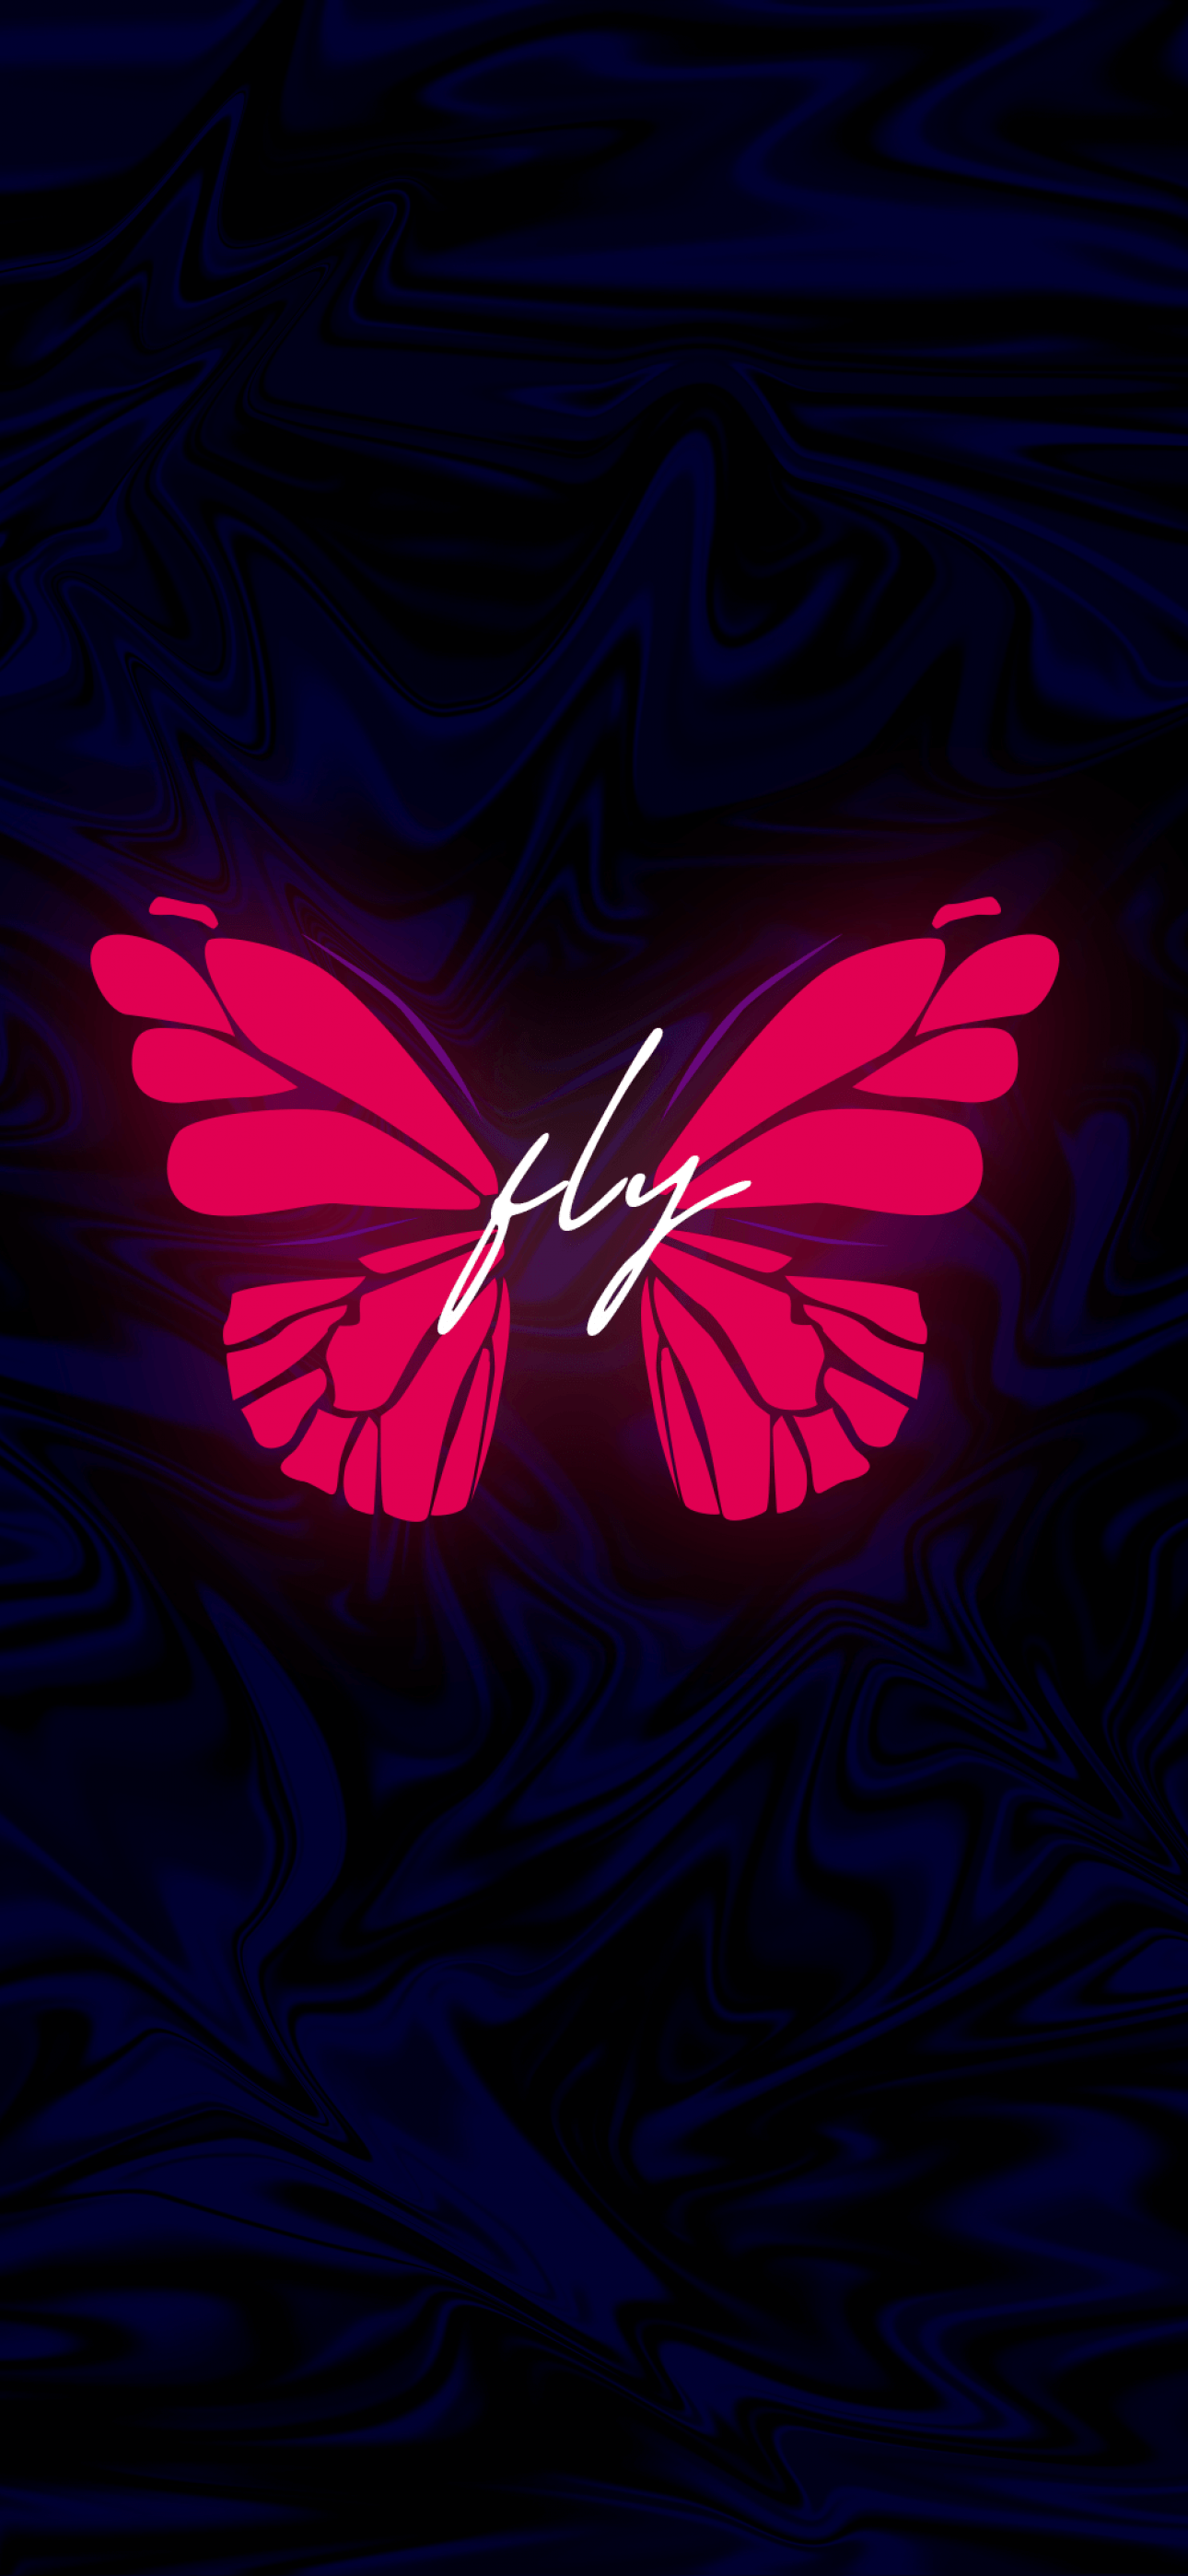 A phone wallpaper with a pink butterfly on a dark background - Butterfly